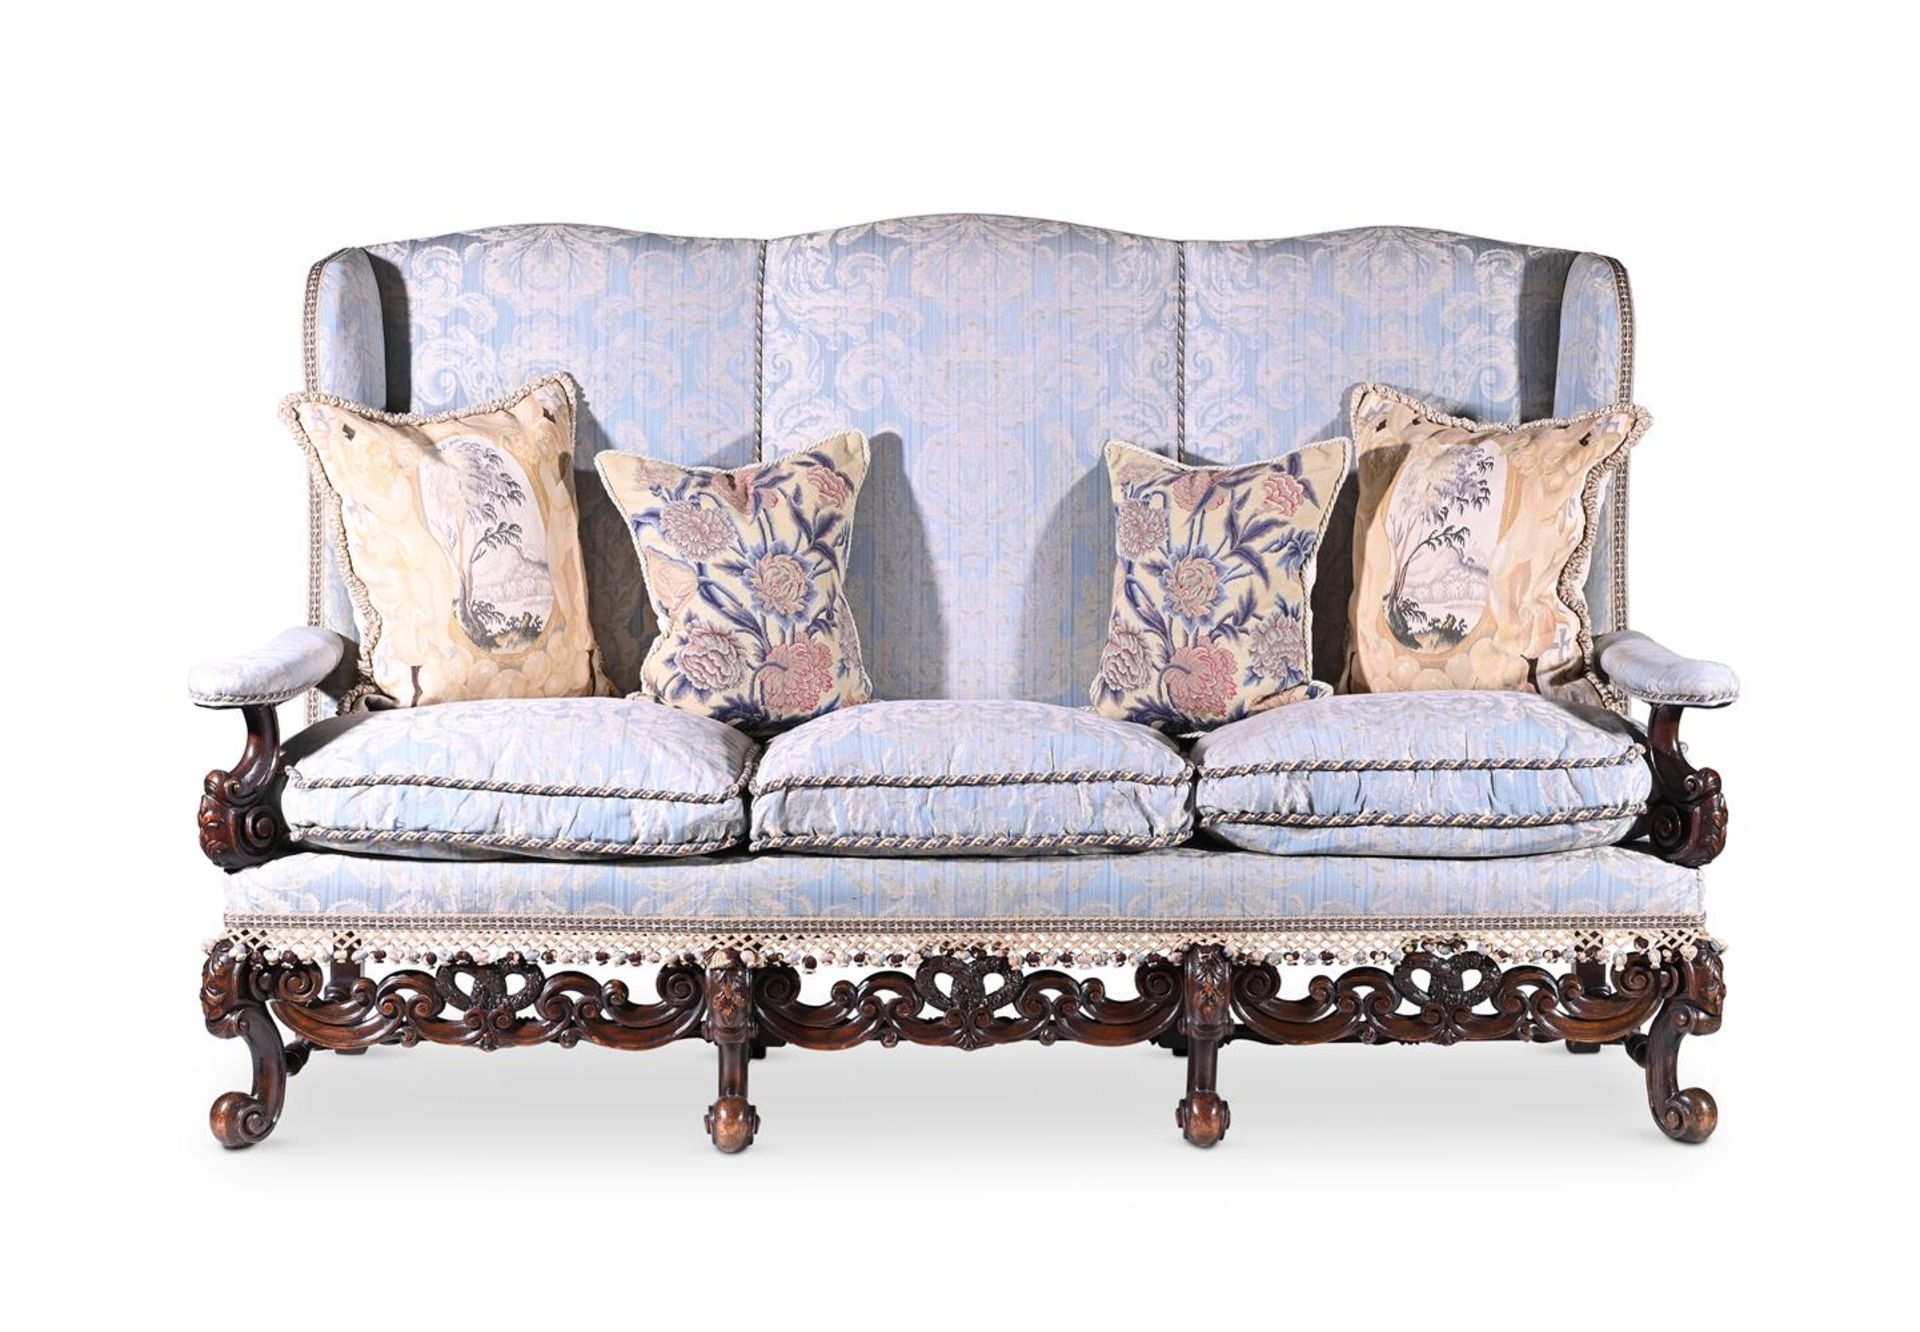 A CARVED WALNUT AND UPHOLSTERED SOFA IN LATE 17TH CENTURY STYLE, FIRST HALF 20TH CENTURY